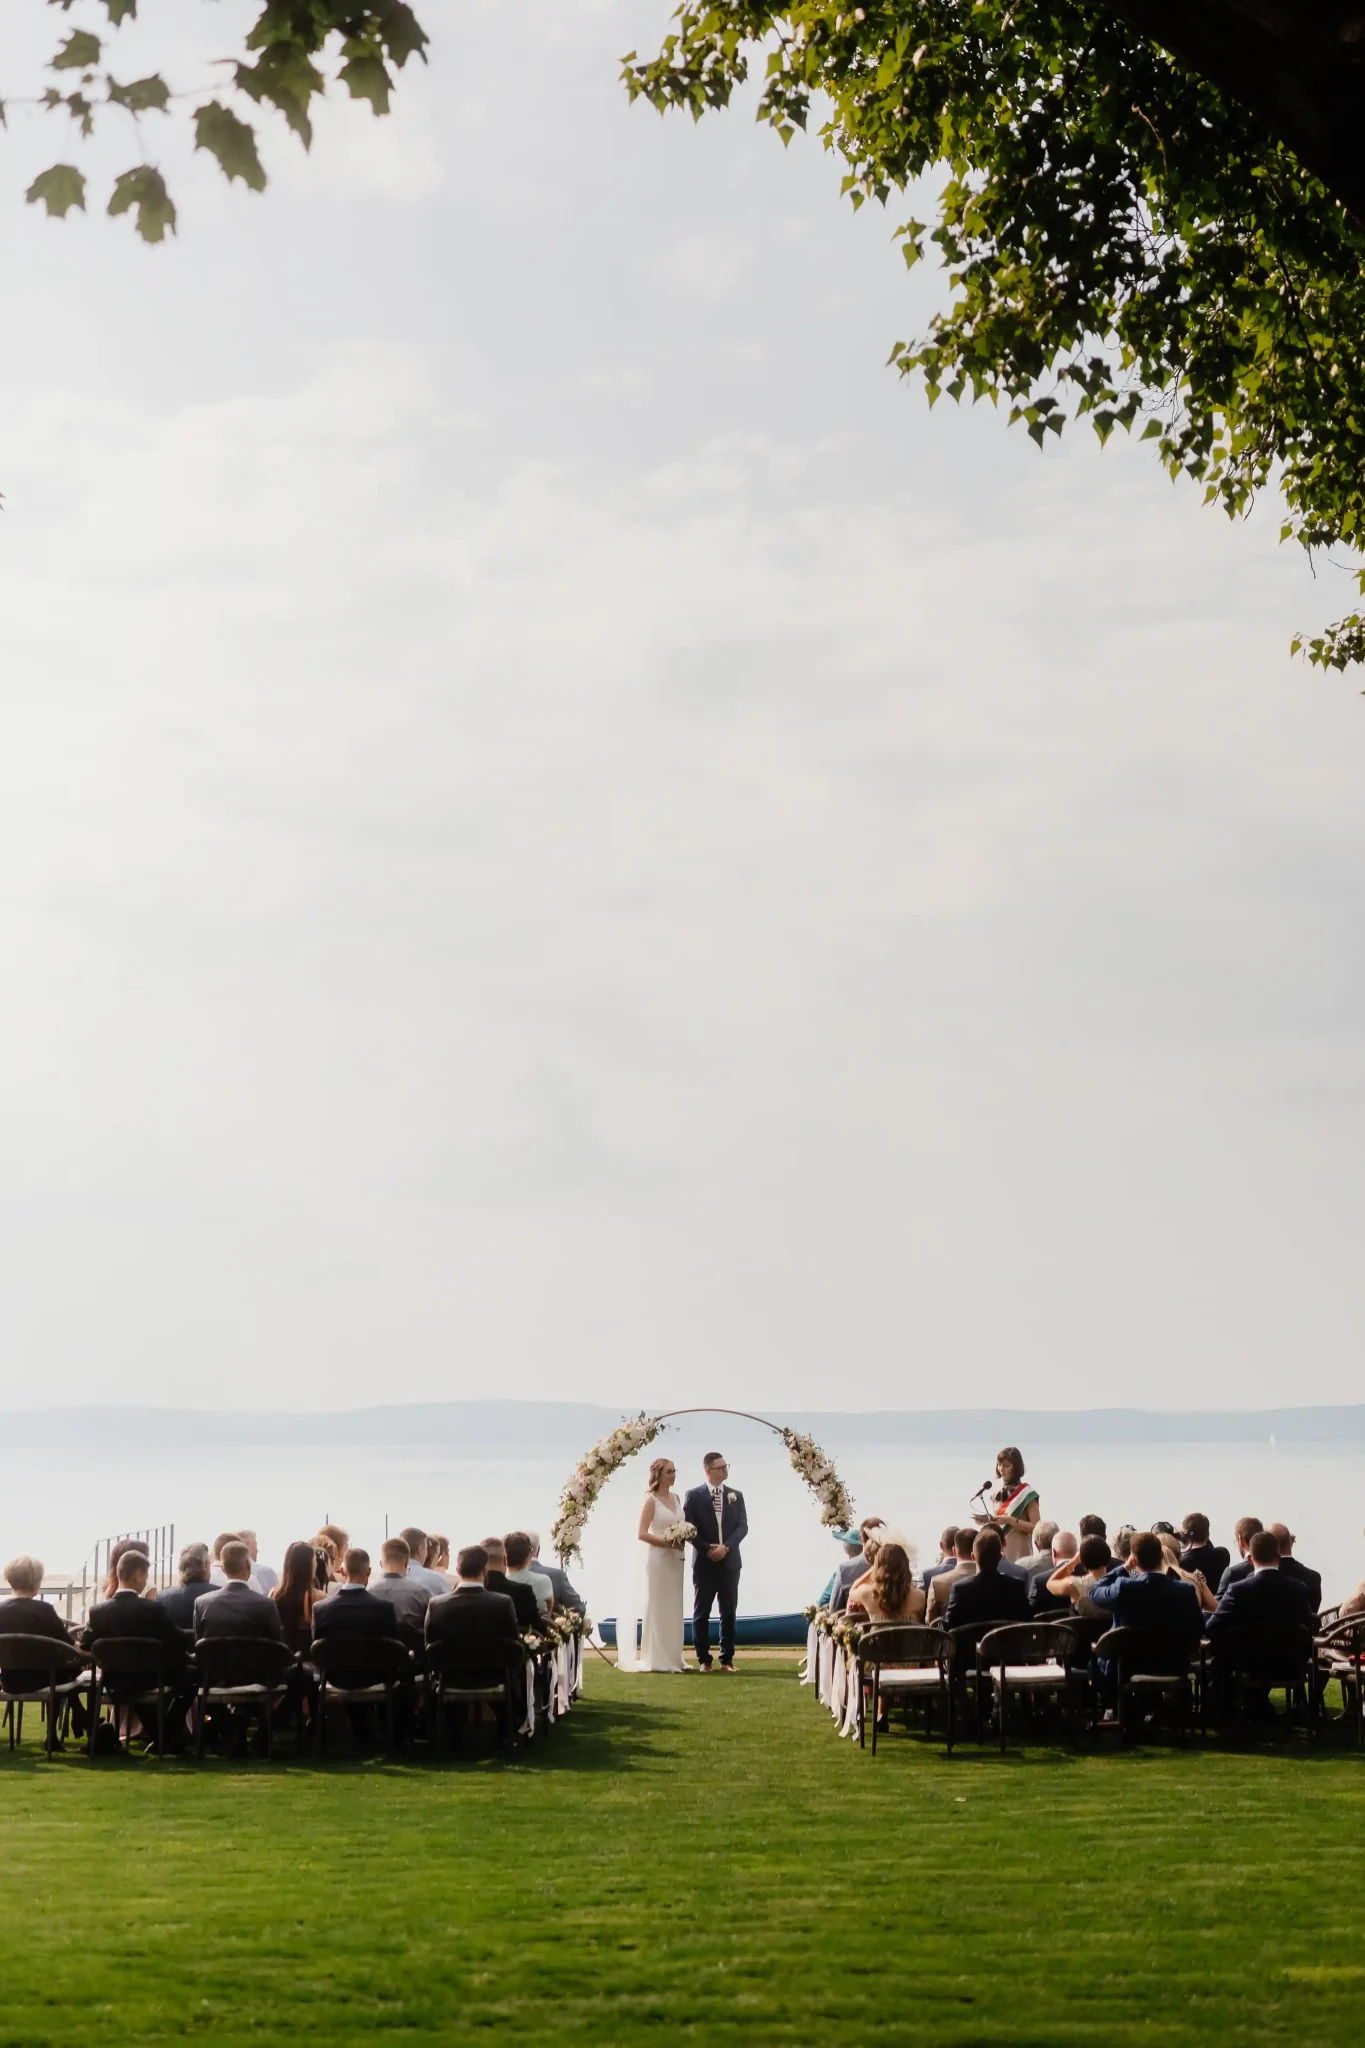 A wedding ceremony on the lawn overlooking the lake.